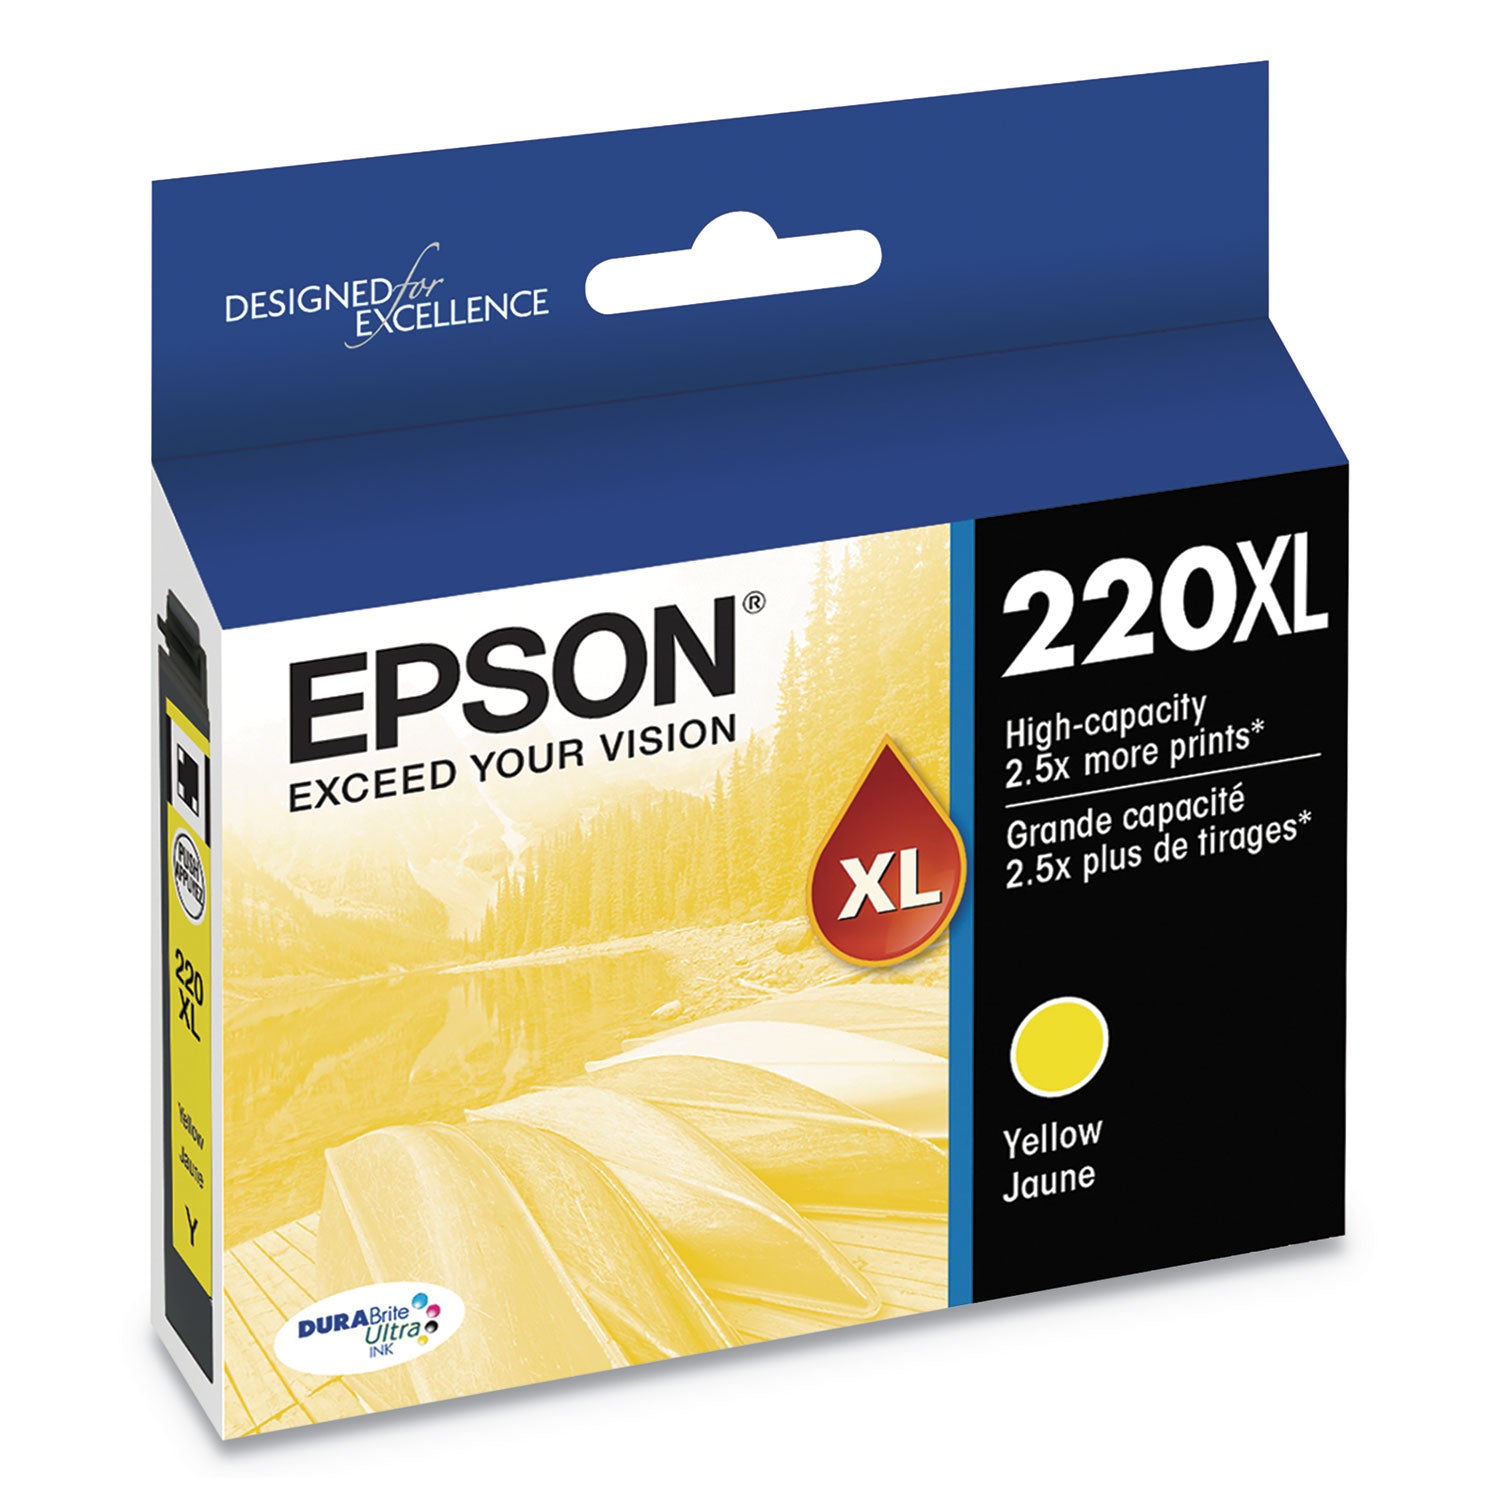 t220xl420-s-220xl-durabrite-ultra-high-yield-ink-450-page-yield-yellow_epst220xl420s - 2